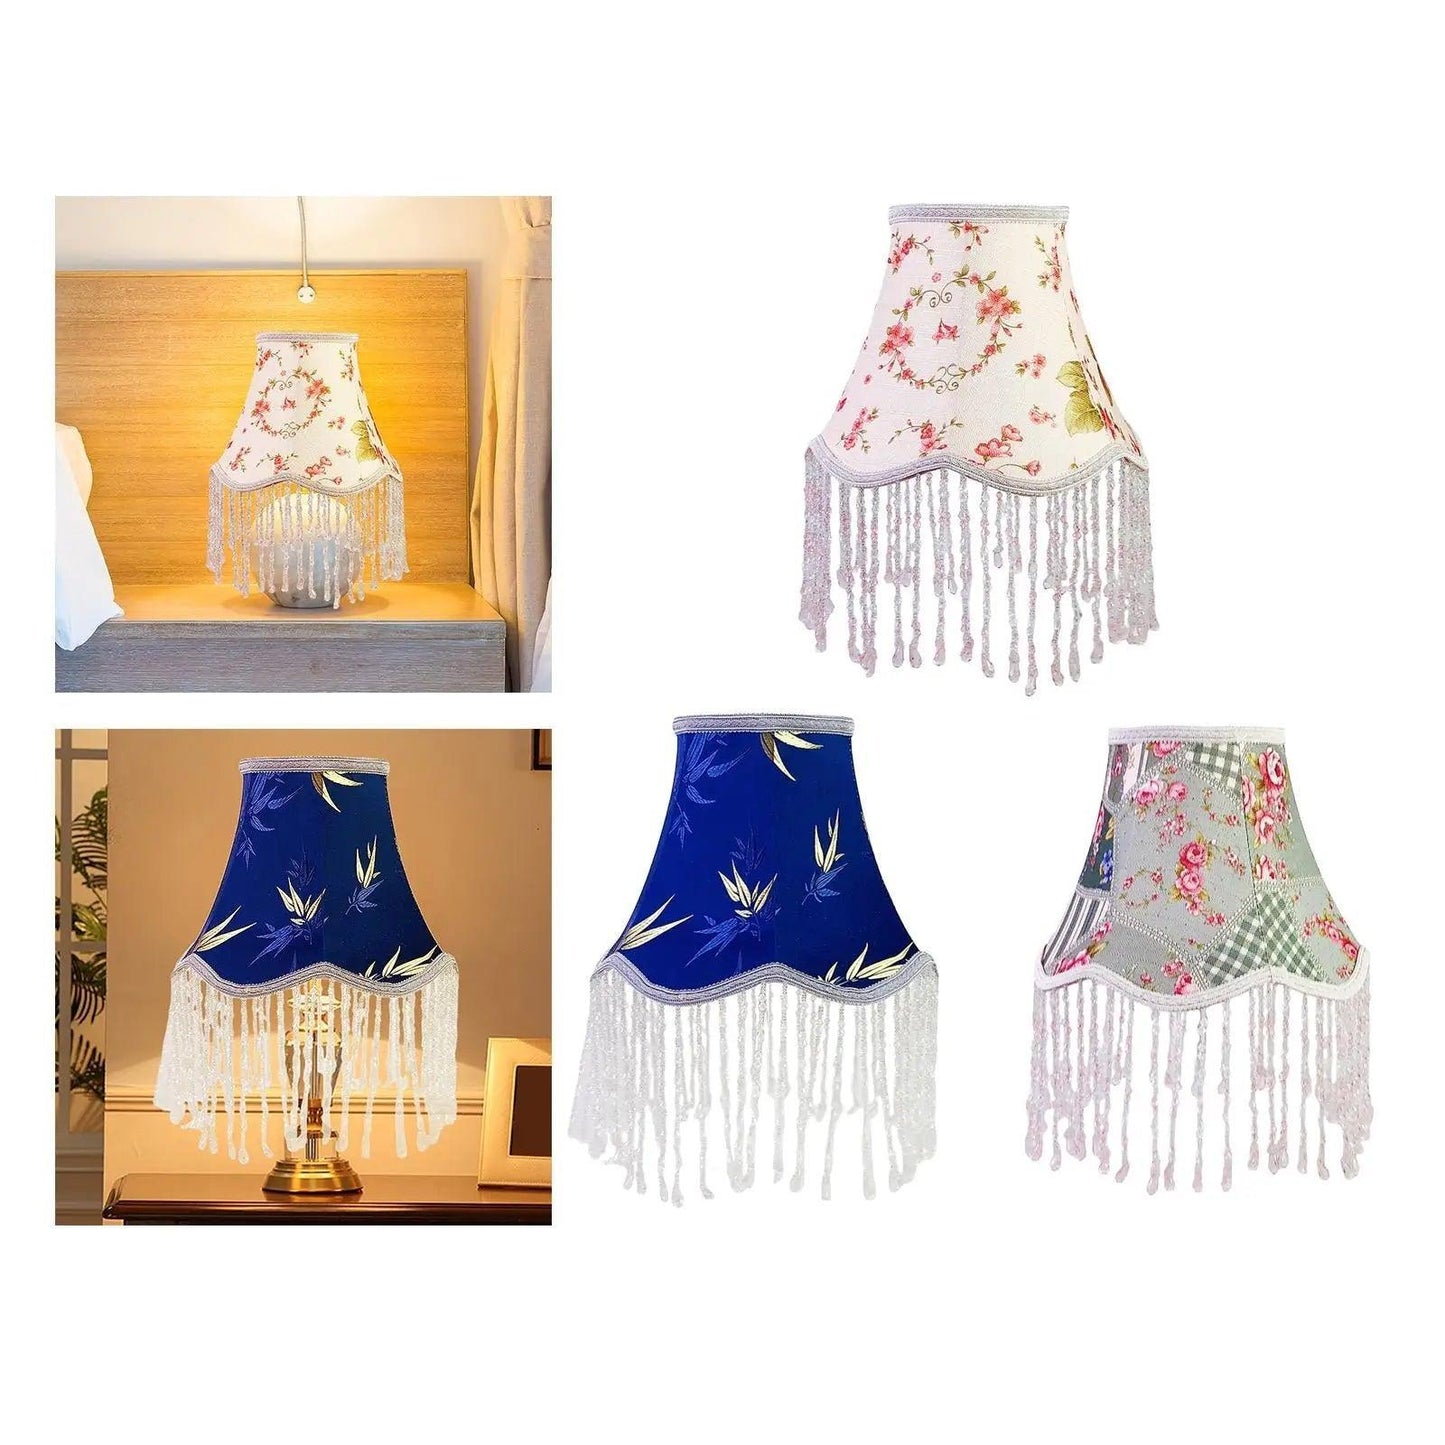 European Lampshade for Pendant Light Shade Lamp Shade with Fringe Beads Lamp - Specialty Shades